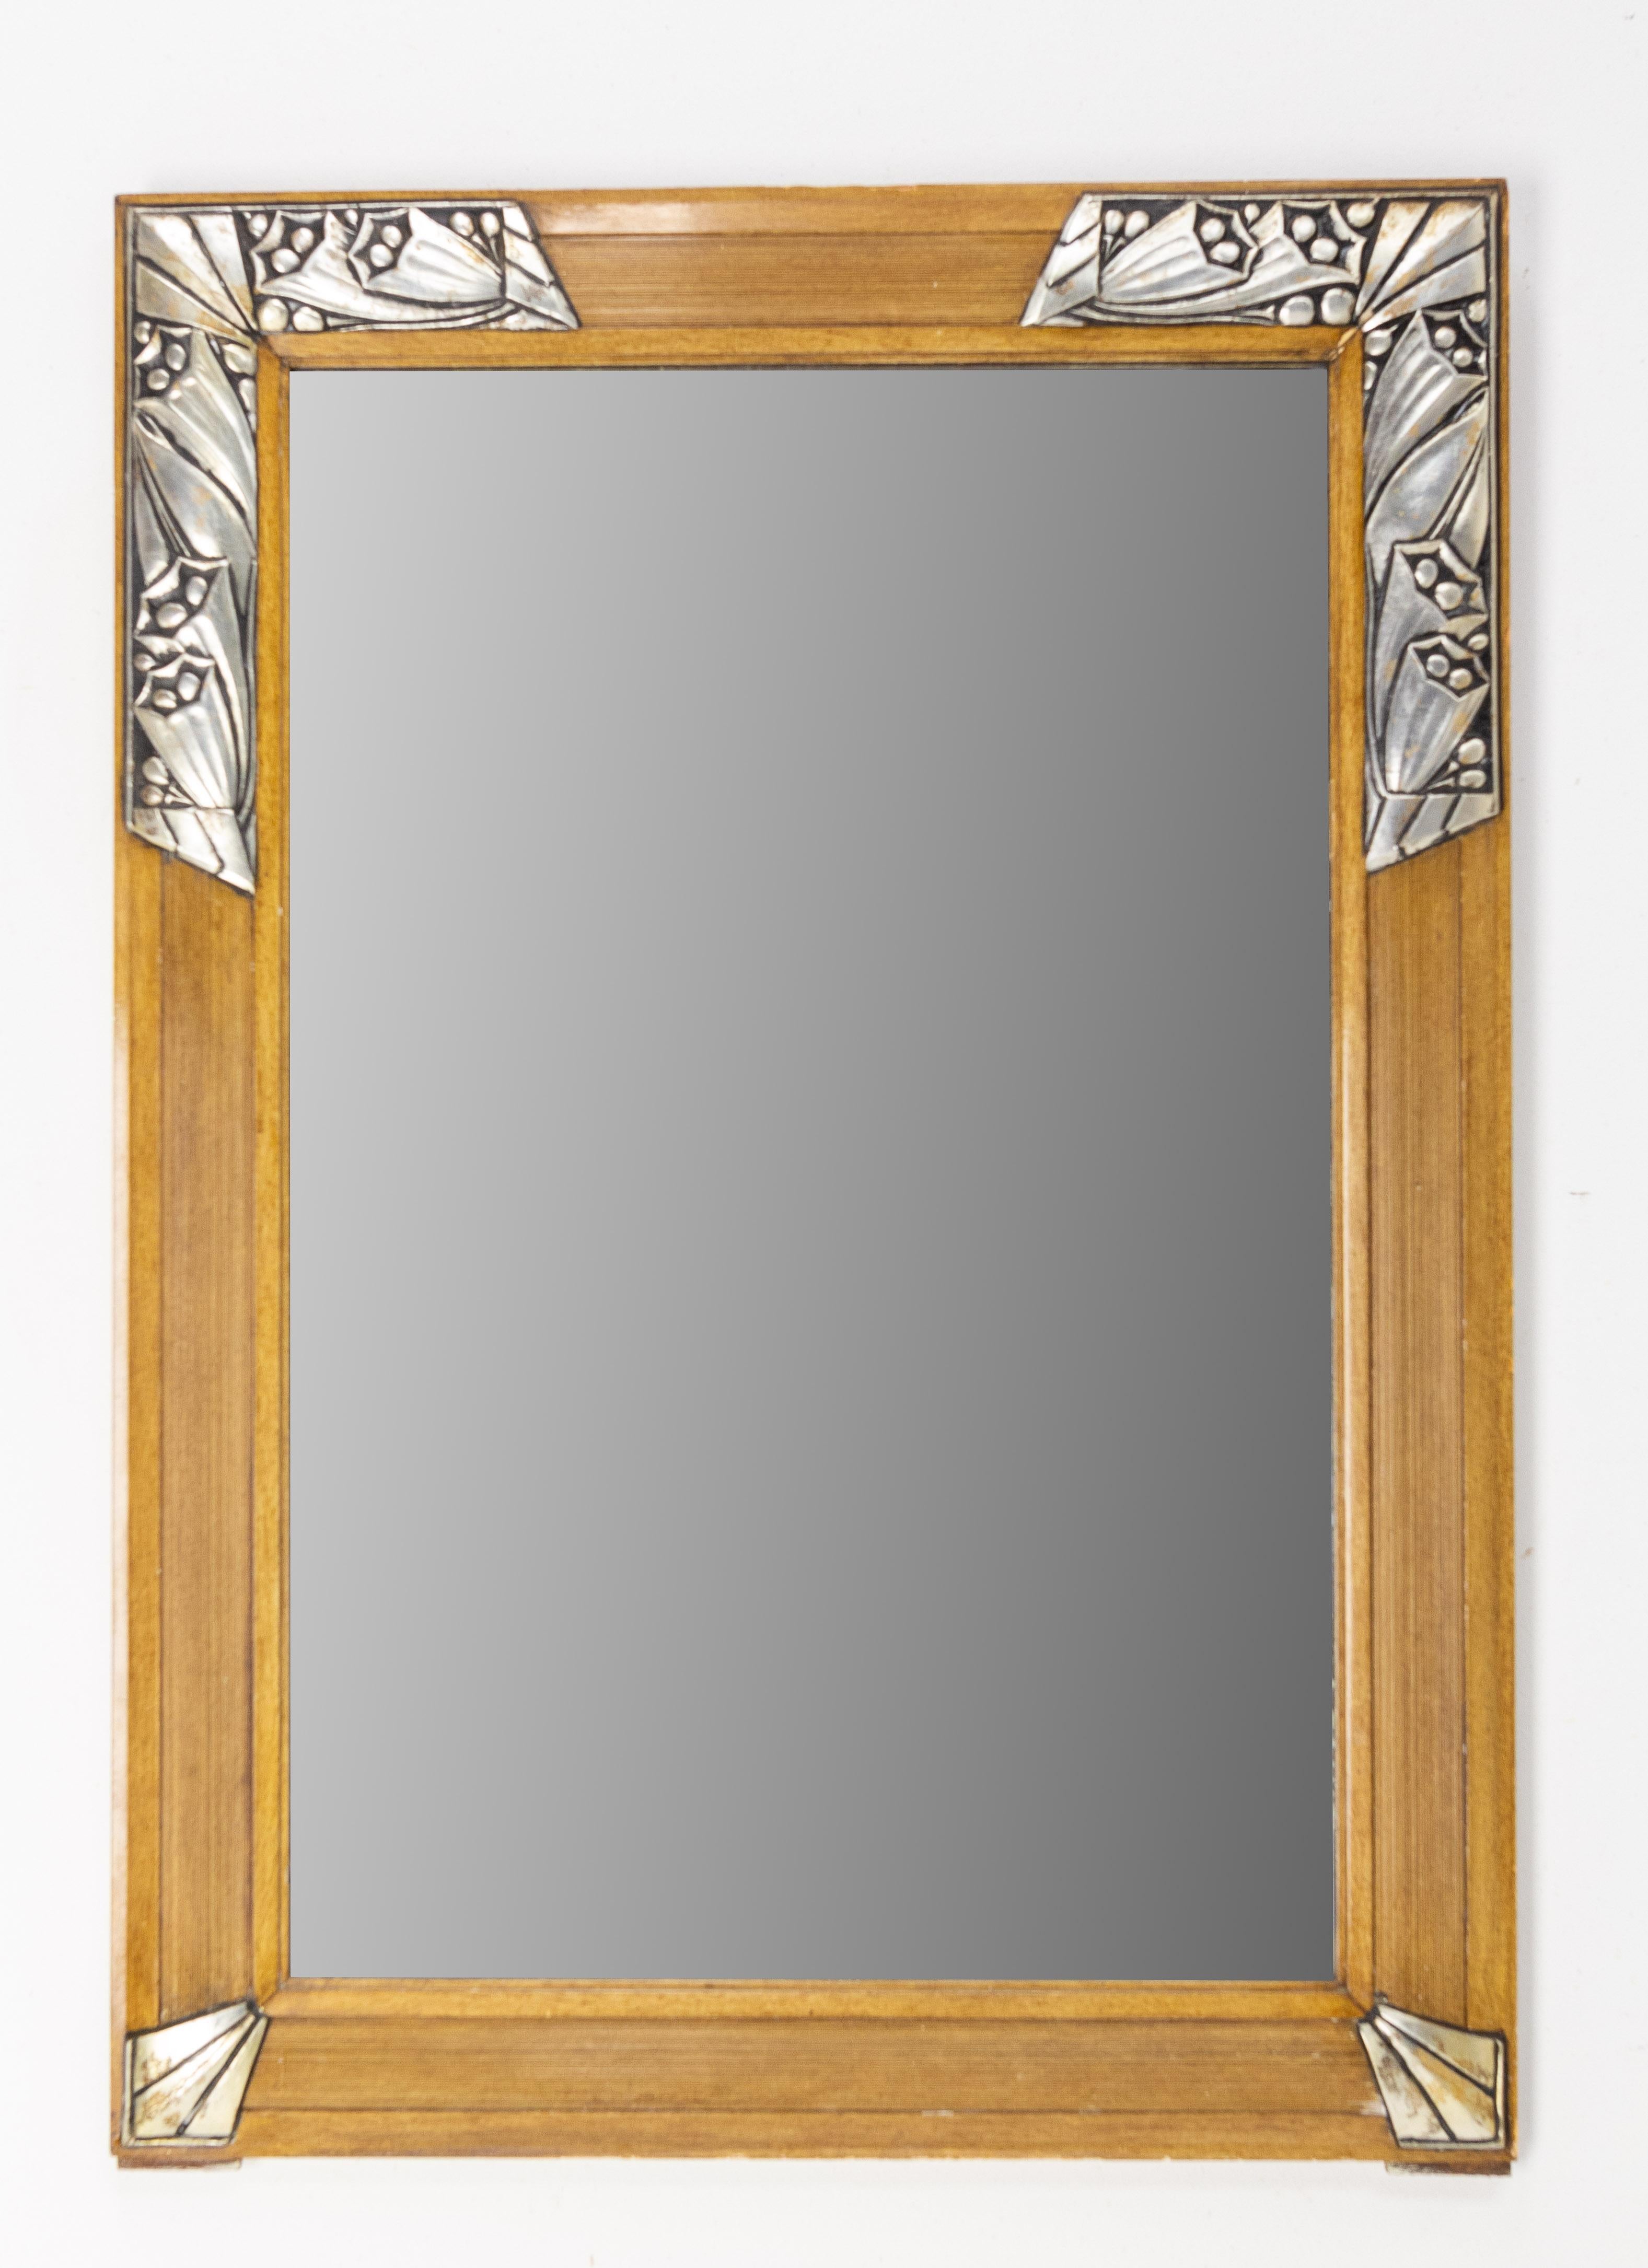 Art Deco mirror with metal and pine framework
French, 1930
Flowers and geometrical patterns
Simple and chic mirror
The mirror is the original
Good antique condition.

Shipping: 
L66,5 P3 H88,5 8,7 kg.